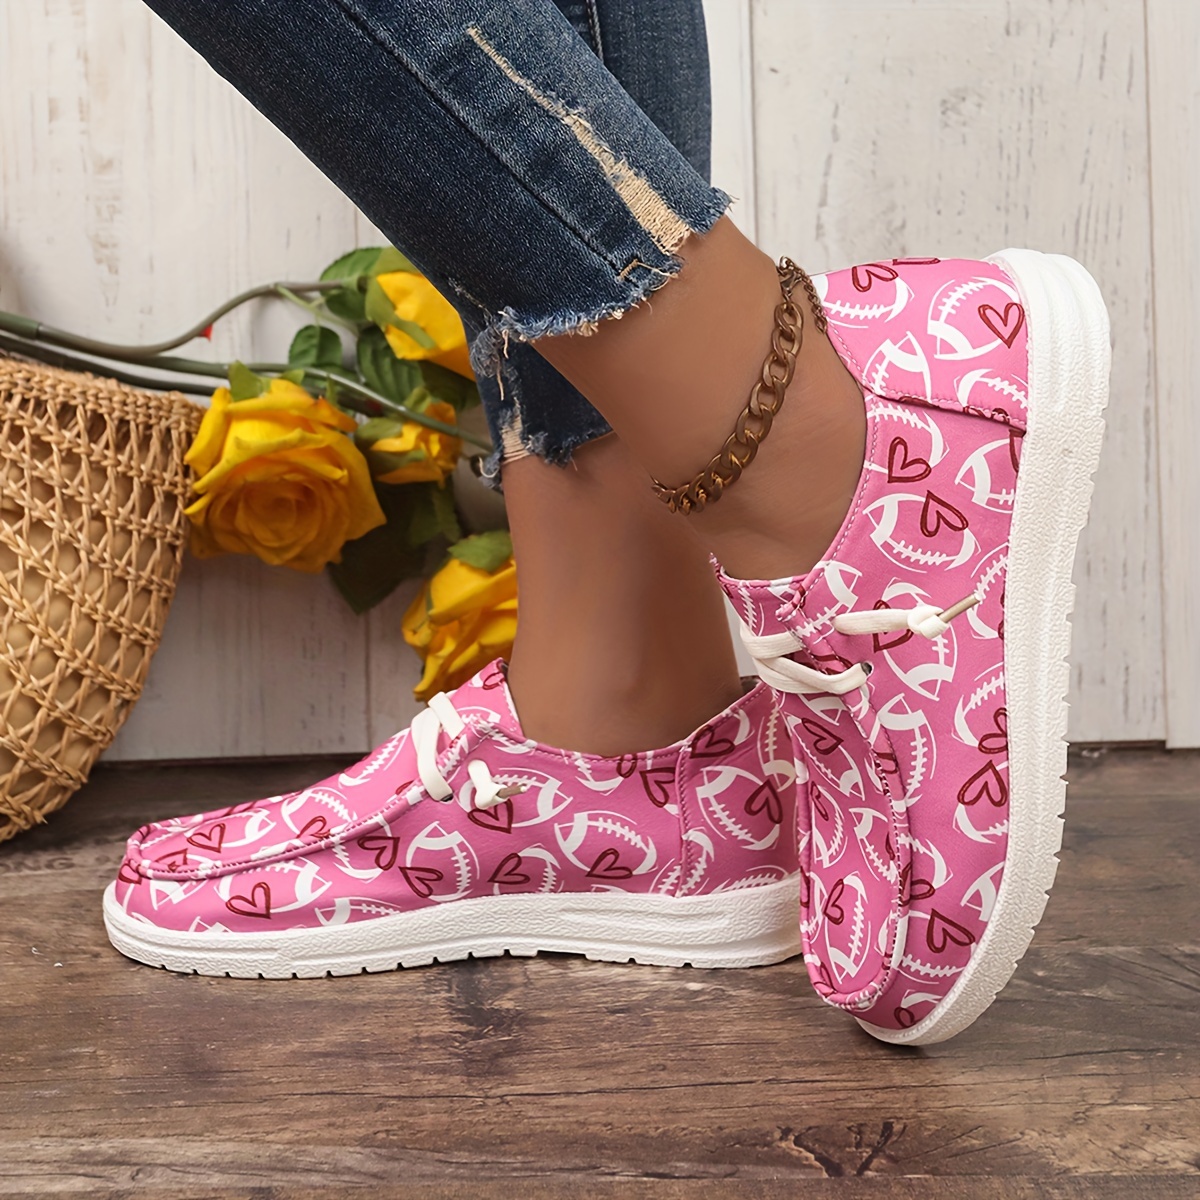 Women's Lip & Heart Print Canvas Shoes, Casual Lace Up Outdoor Shoes,  Lightweight Low Top Valentine's Day Sneakers, Shop Now For Limited-time  Deals